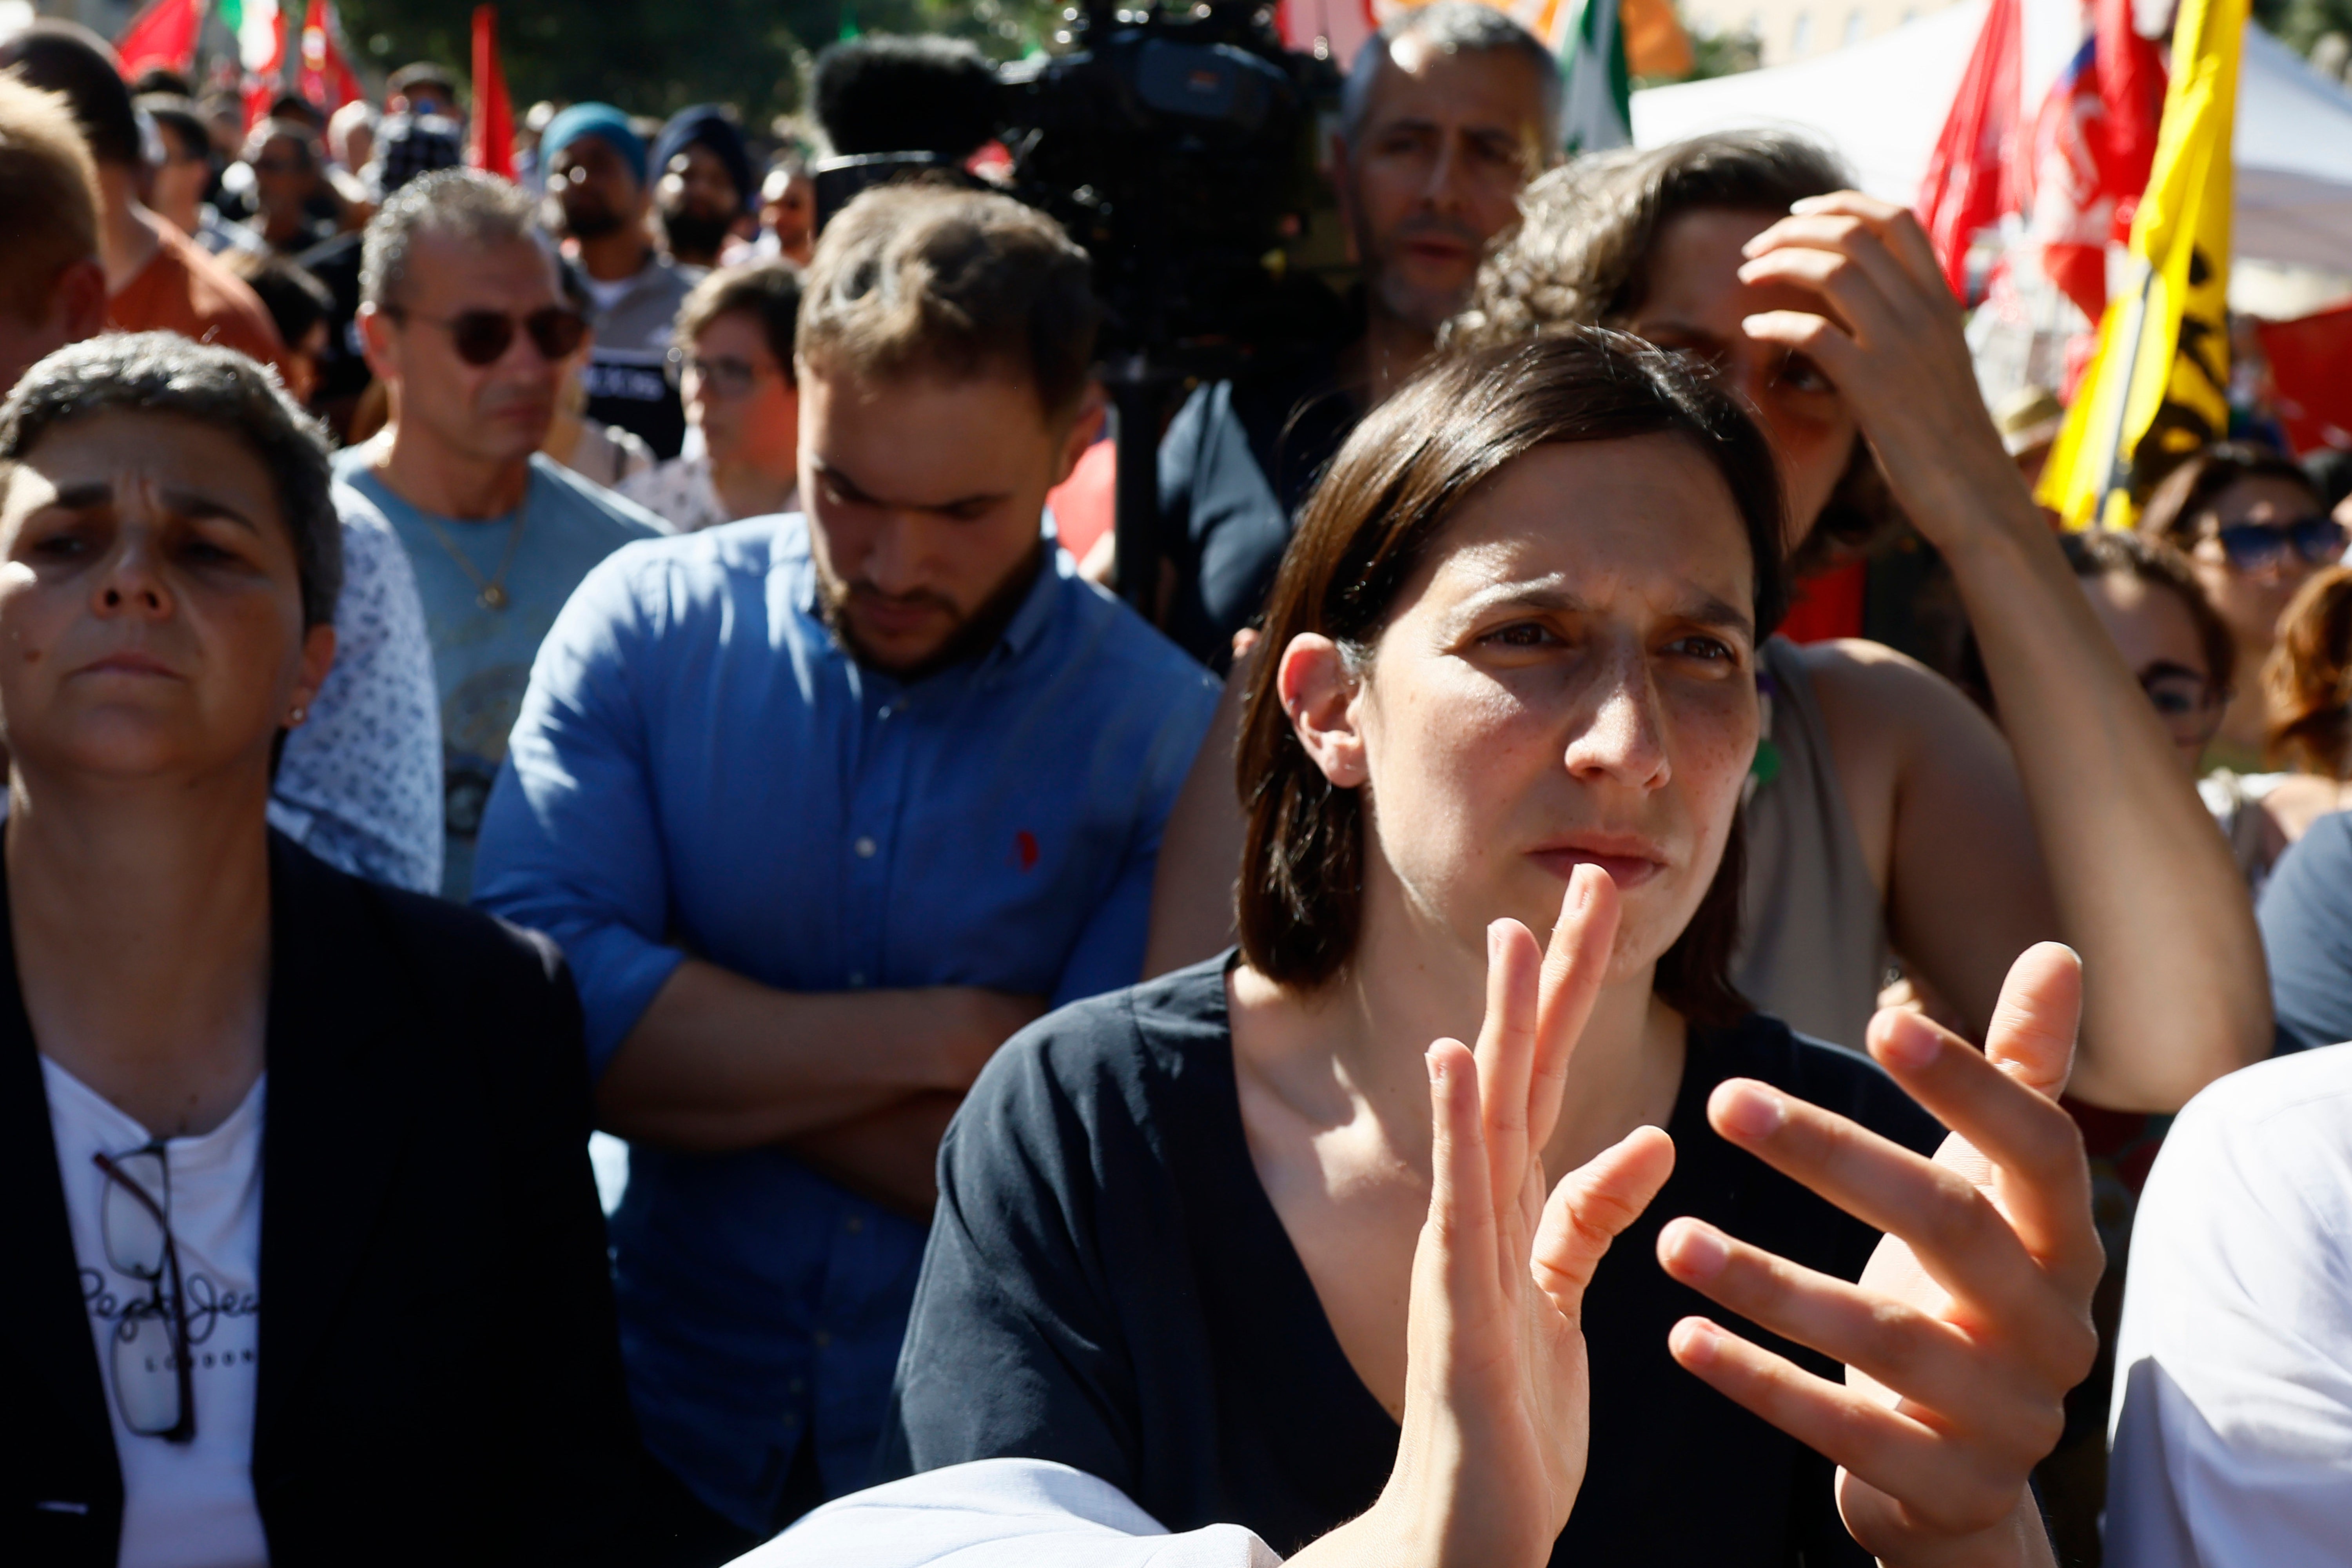 Elly Schlein, leader of the Italian Democratic Party, attends a rally with members of the Indian community in Italy